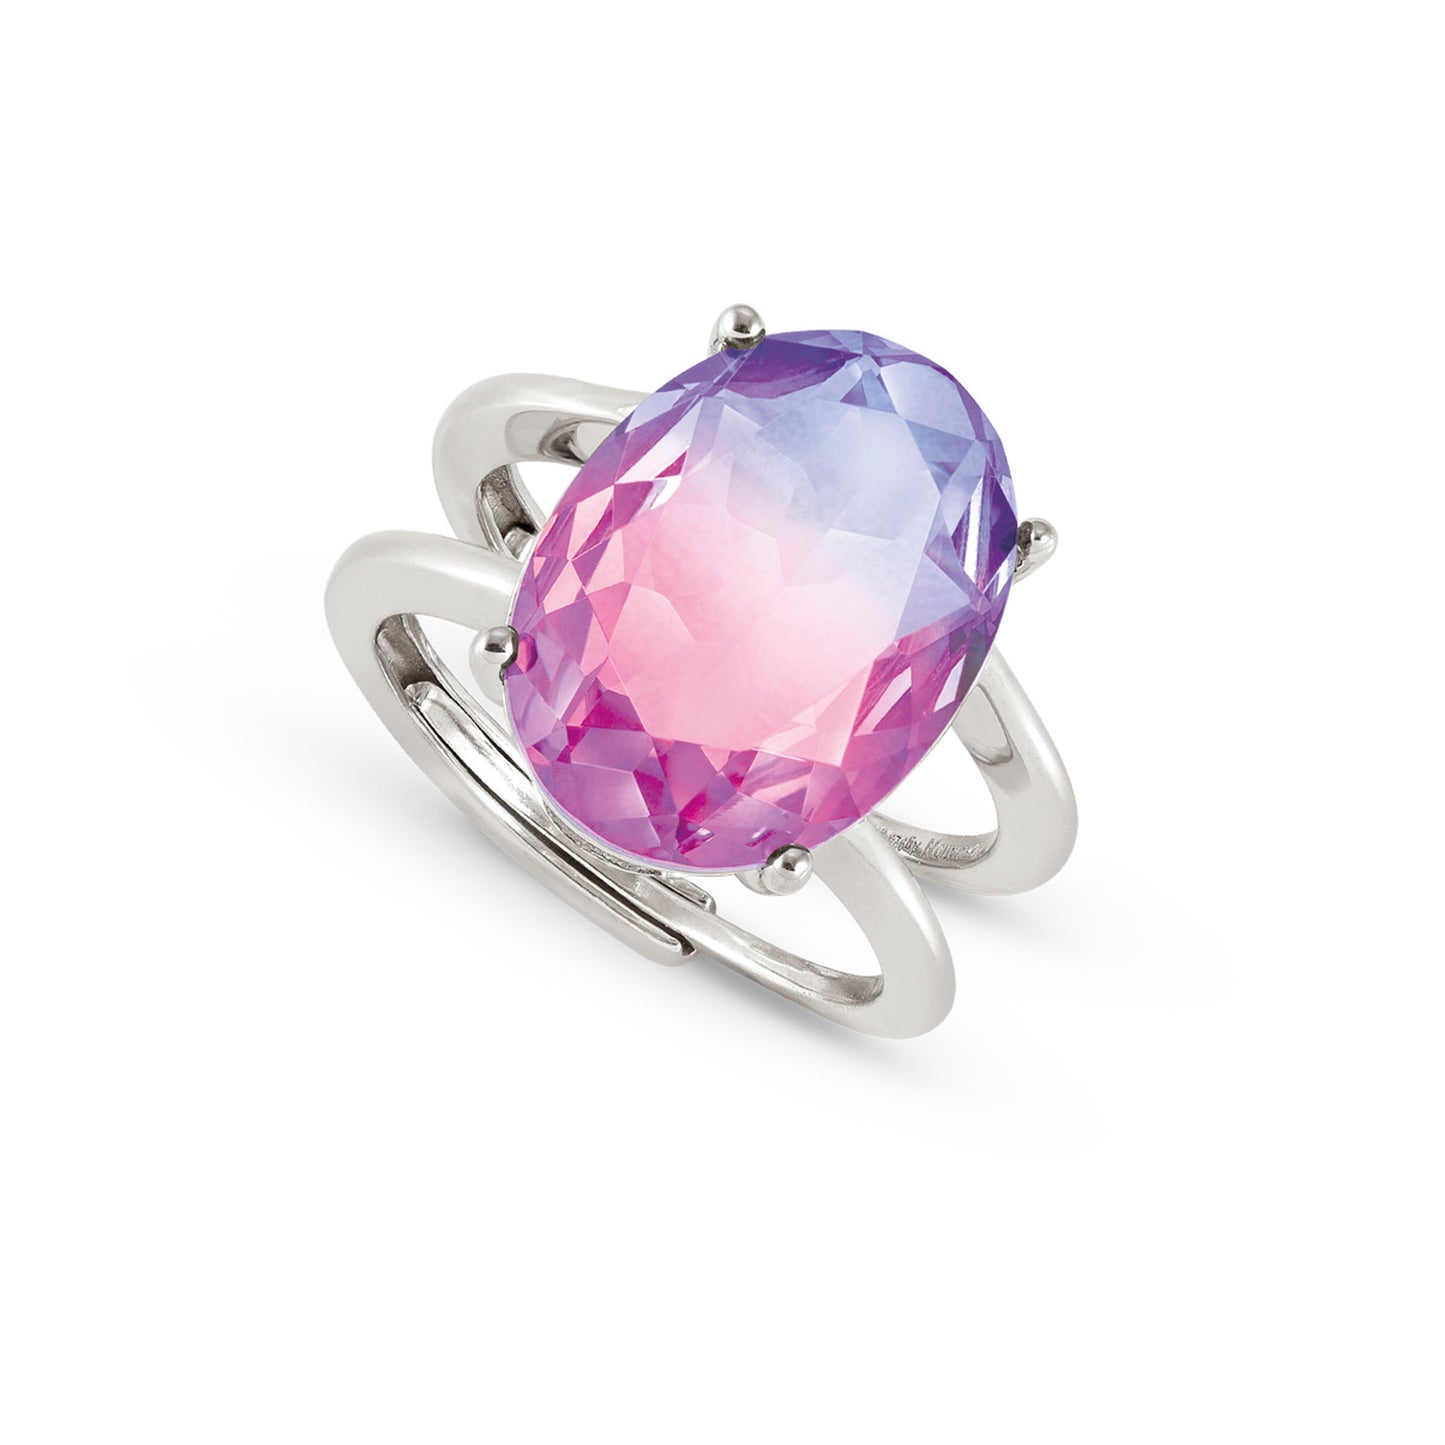 240801/028 SYMBIOSI ring in 925 sterling silver and BICOLOR stones (LARGE) (028_PINK-PURPLE fin, Silver)